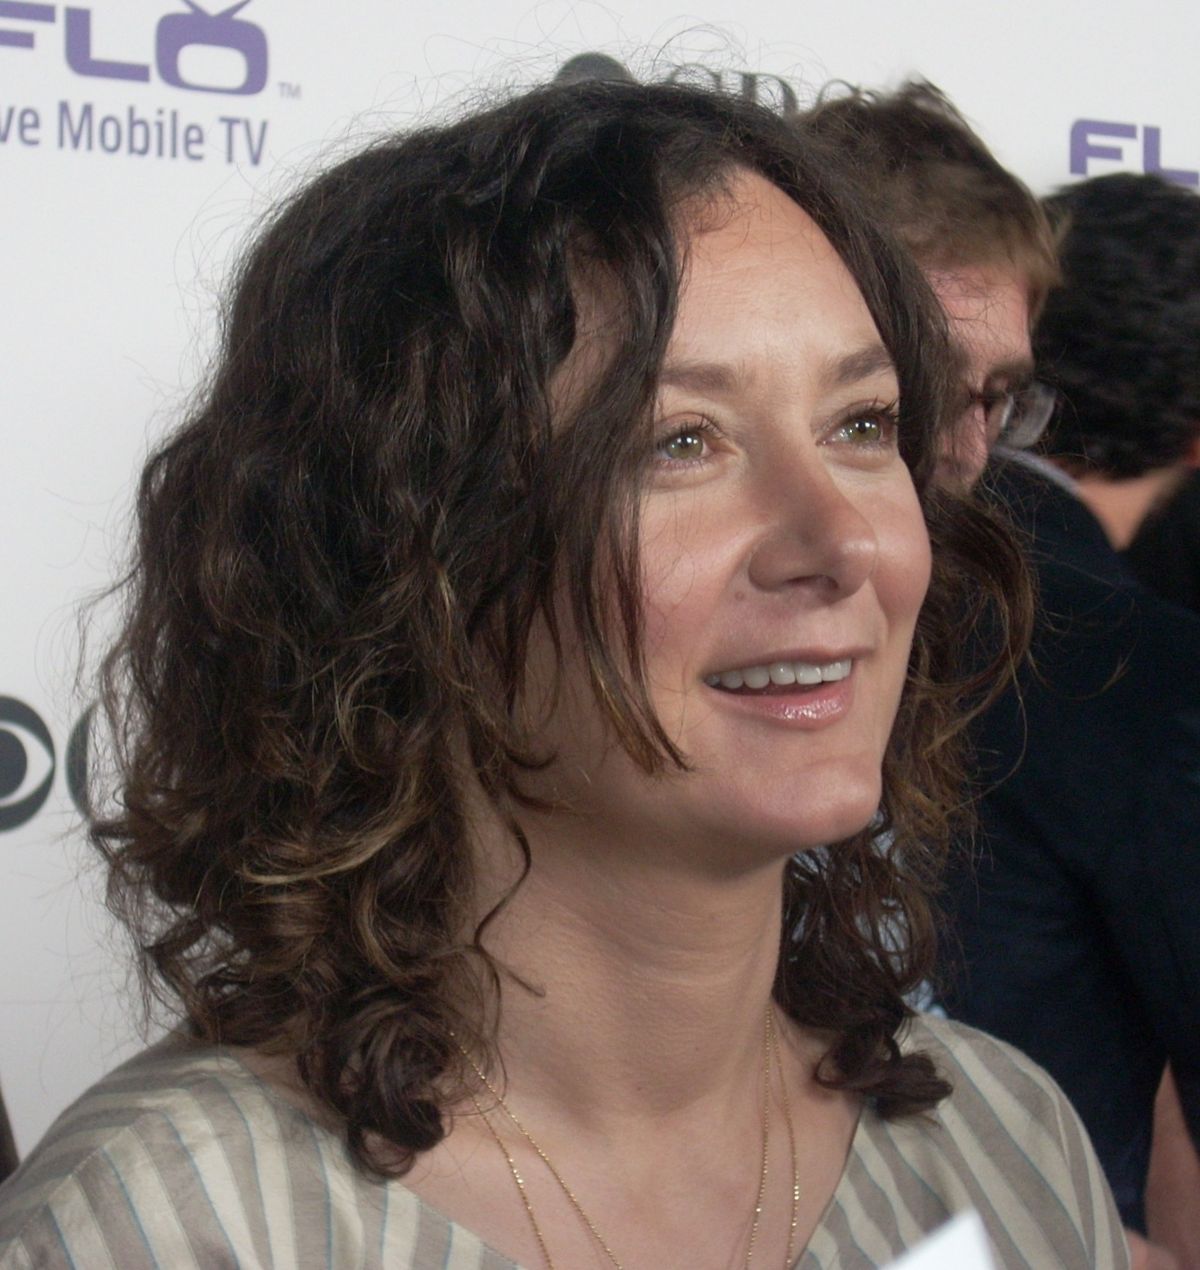 brian curlee recommends sara gilbert hot pic